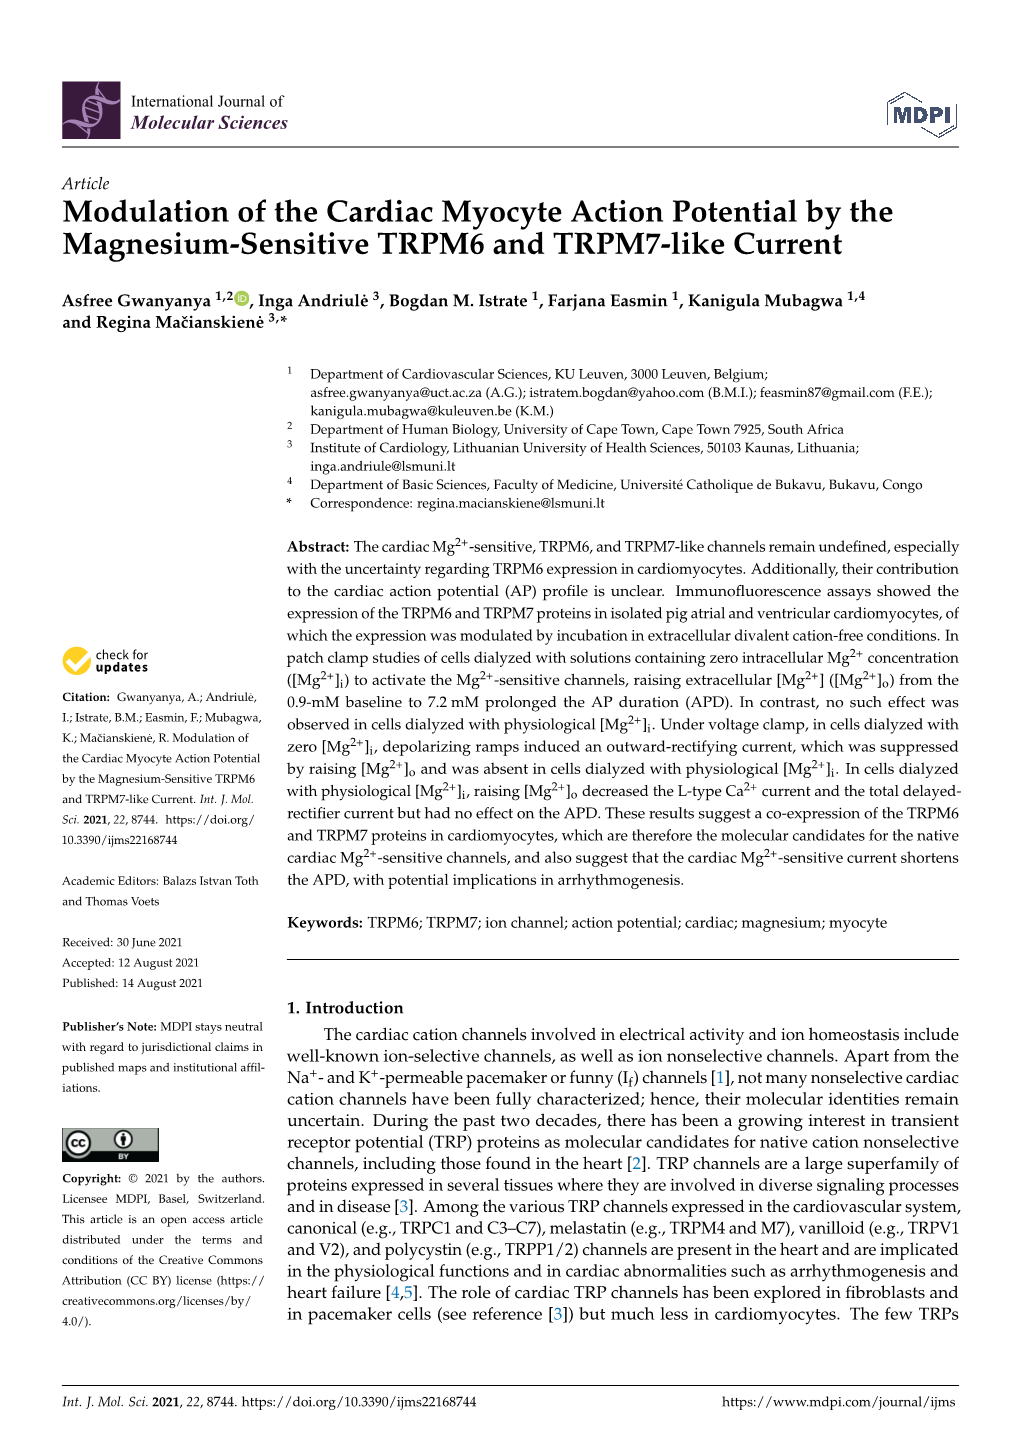 Modulation of the Cardiac Myocyte Action Potential by the Magnesium-Sensitive TRPM6 and TRPM7-Like Current